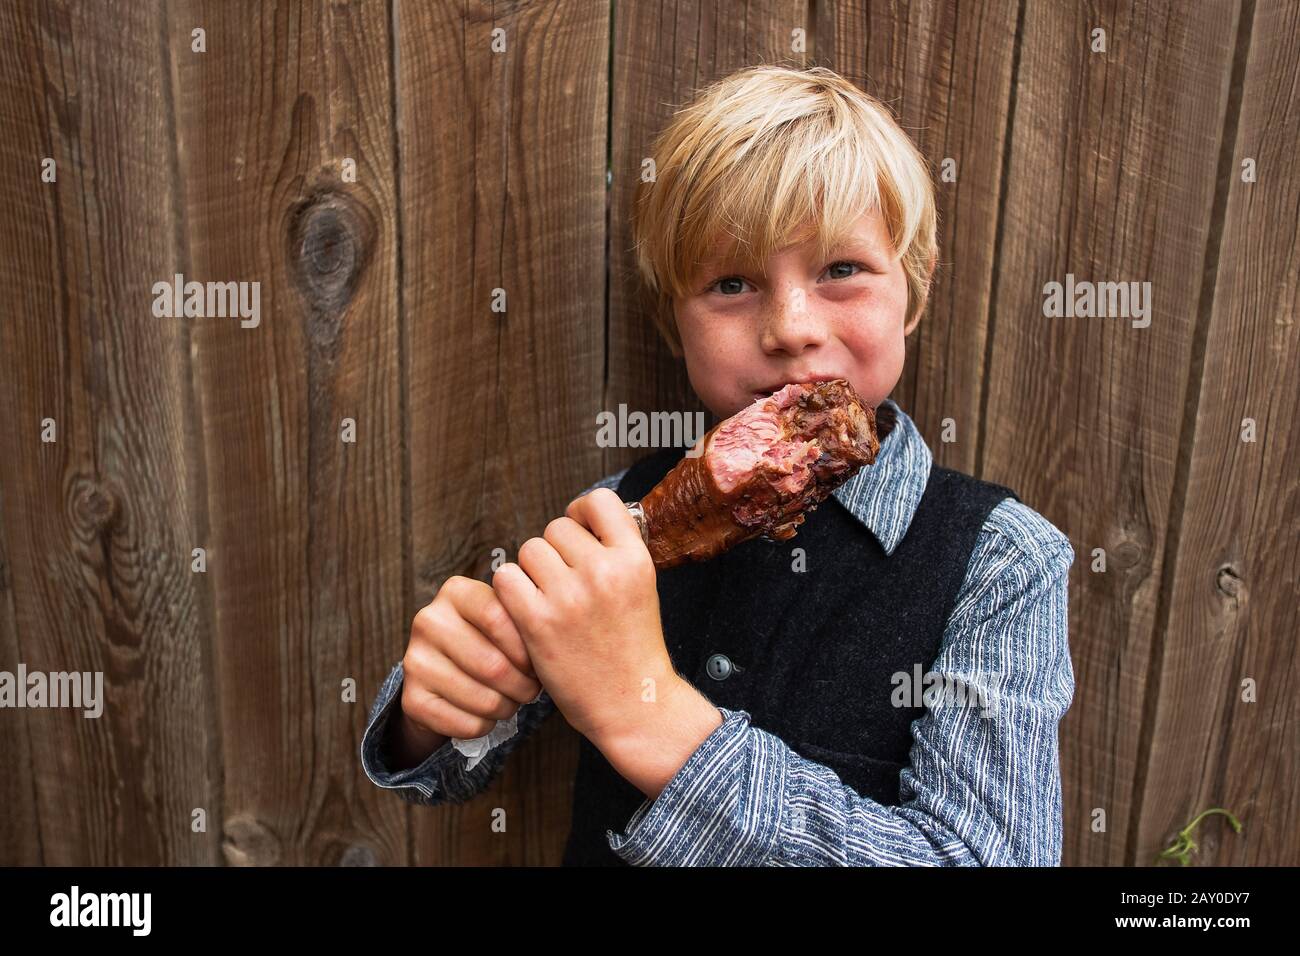 Boy standing by a fence eating a barbecued turkey leg, USA Stock Photo